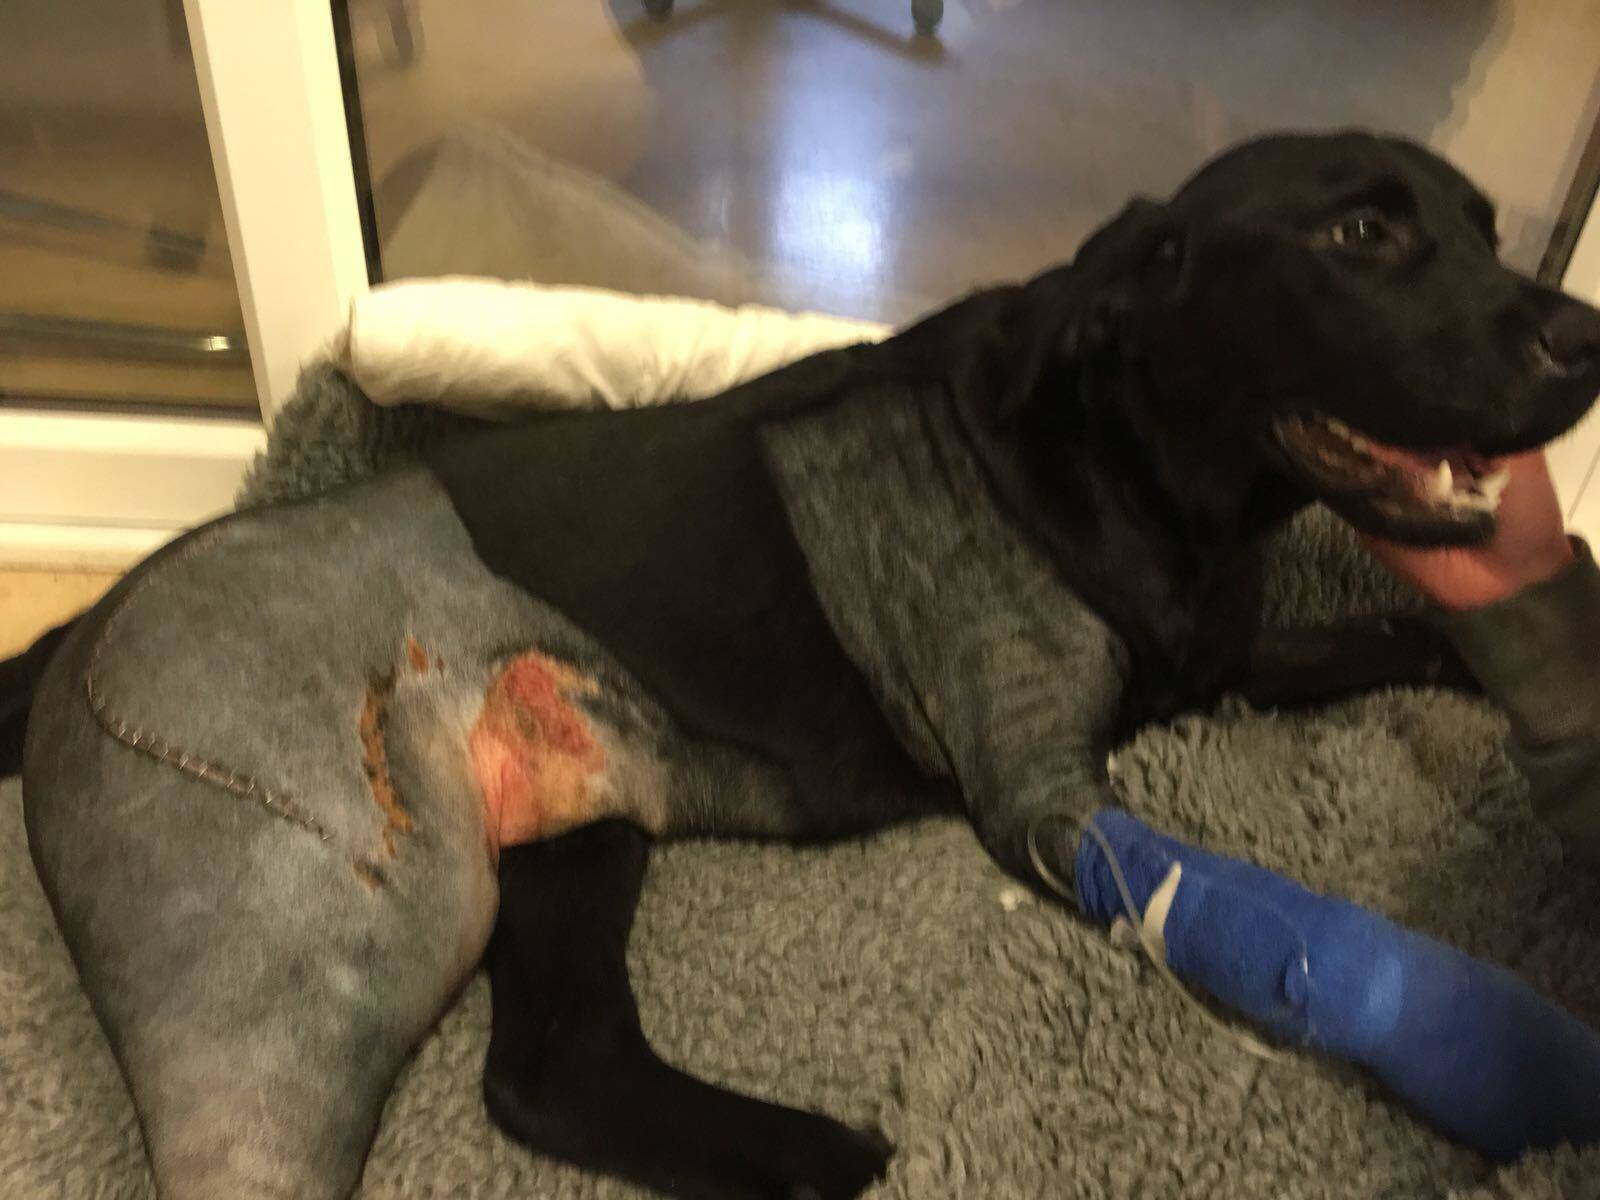 Baxter was left "smashed-up" following a hit and run incident last October.